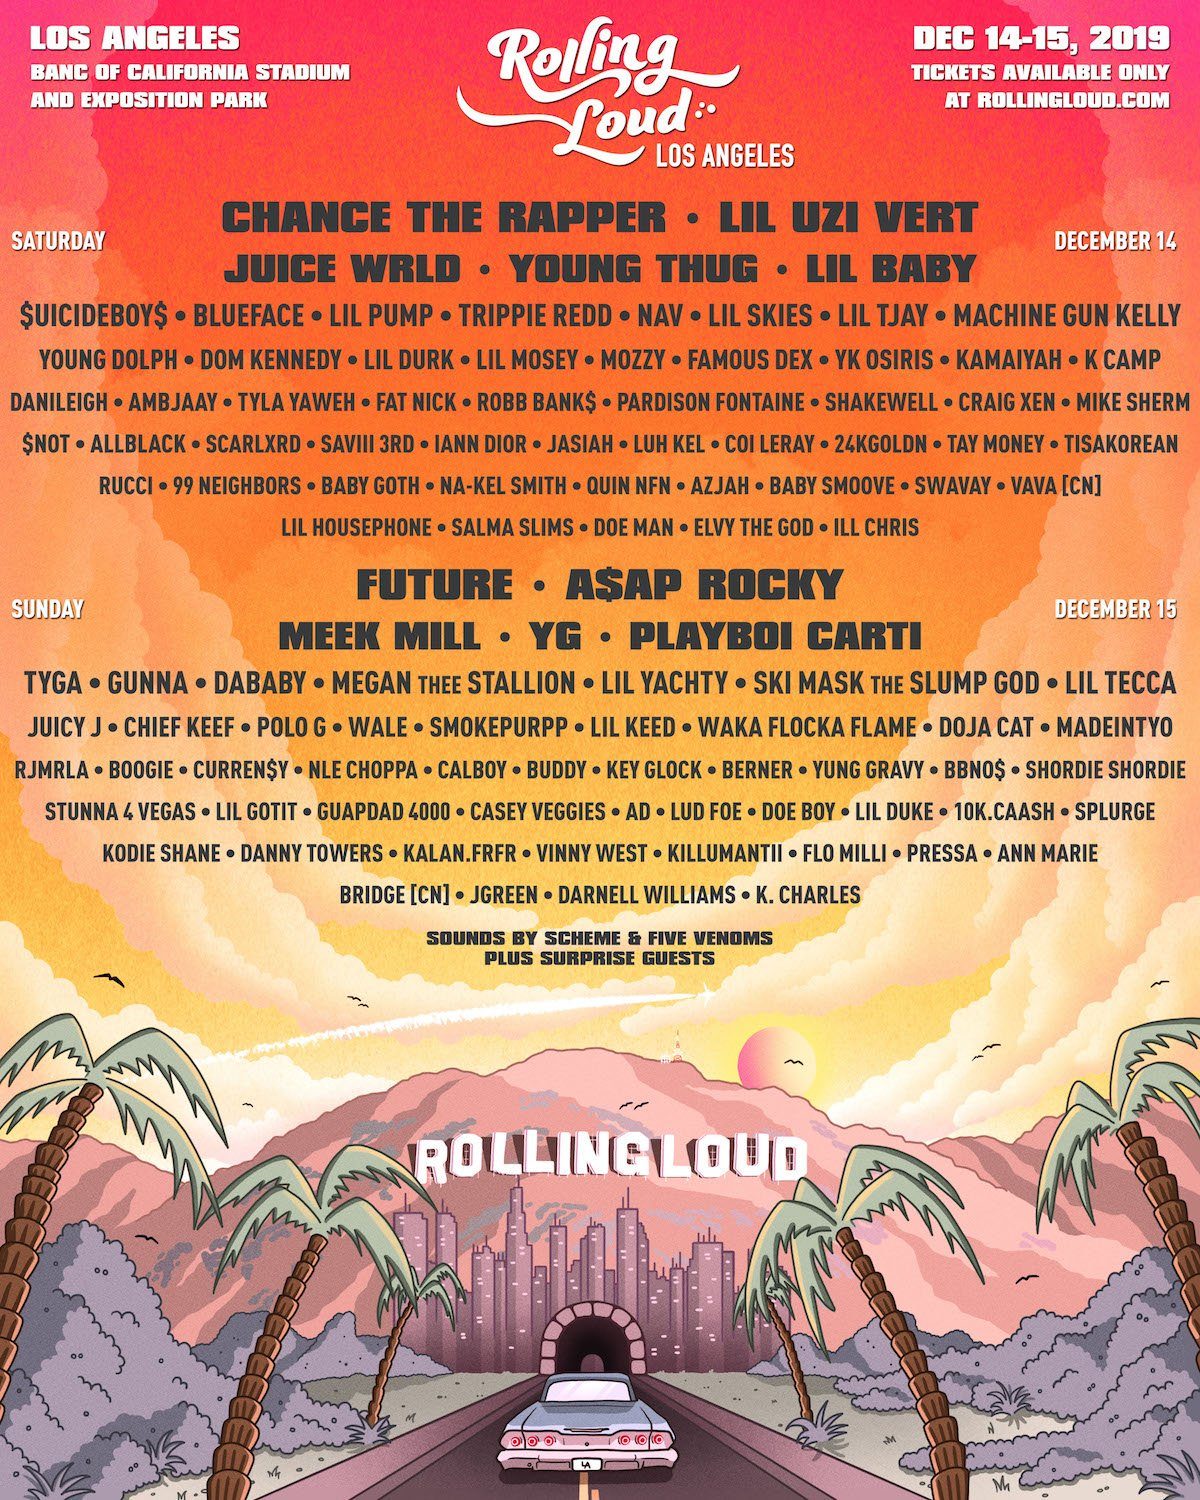 Rolling Loud Los Angeles Announces 2019 Lineup Featuring Future, AAP